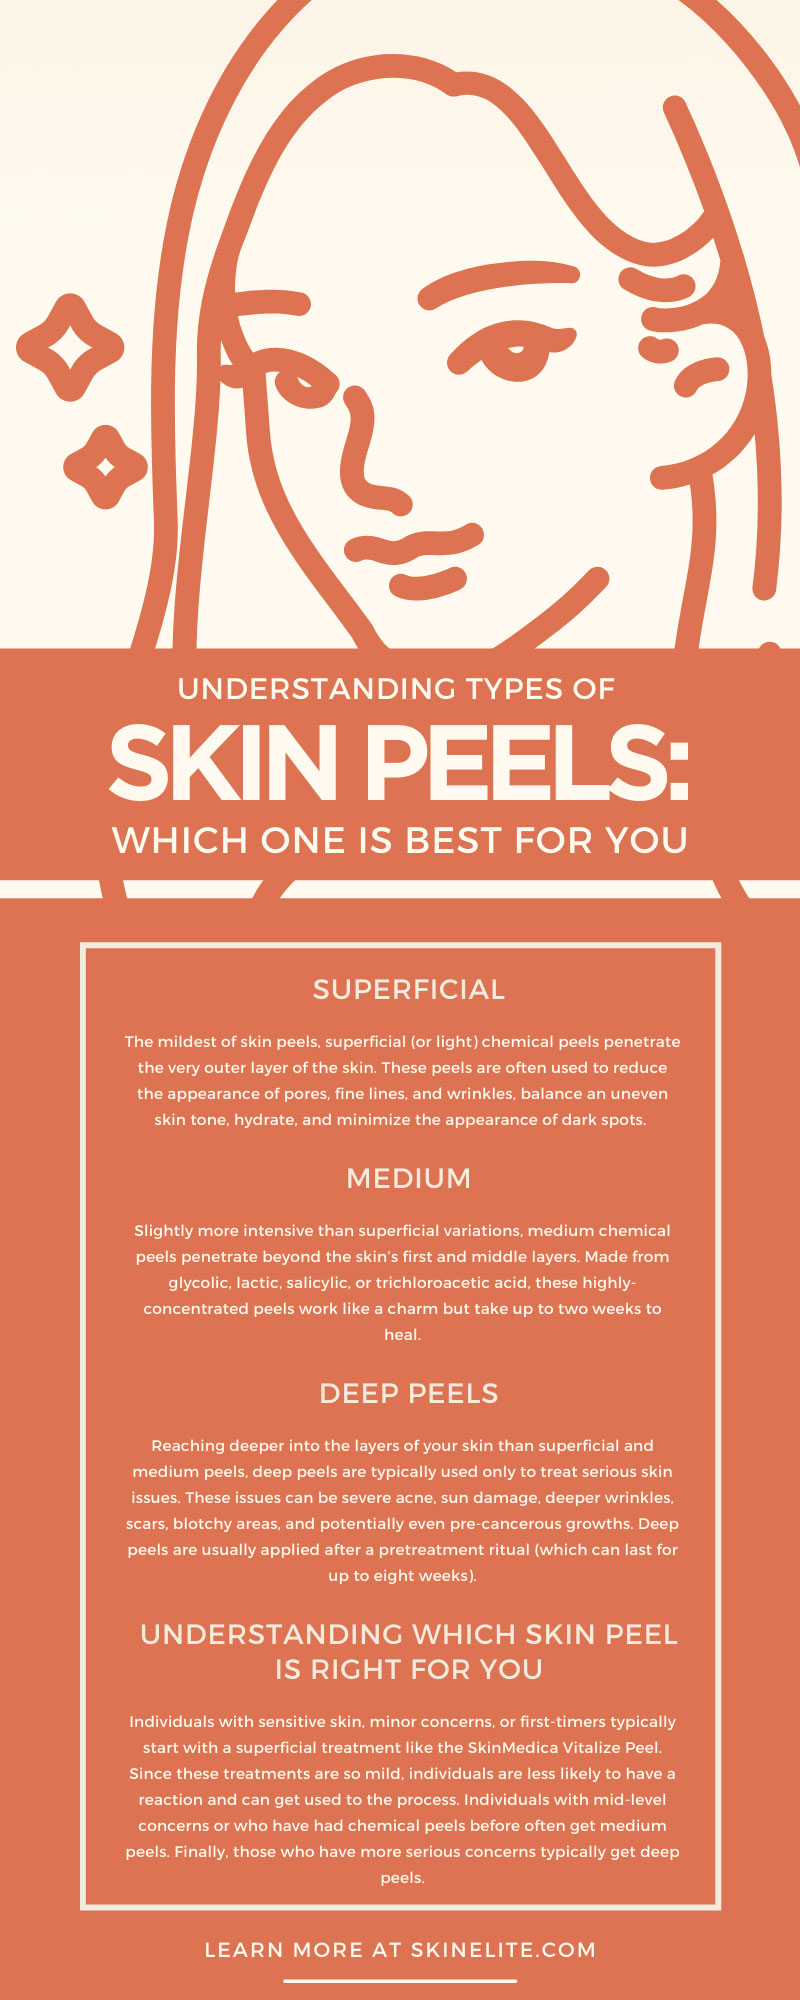 Understanding Types of Skin Peels: Which One Is Best for You